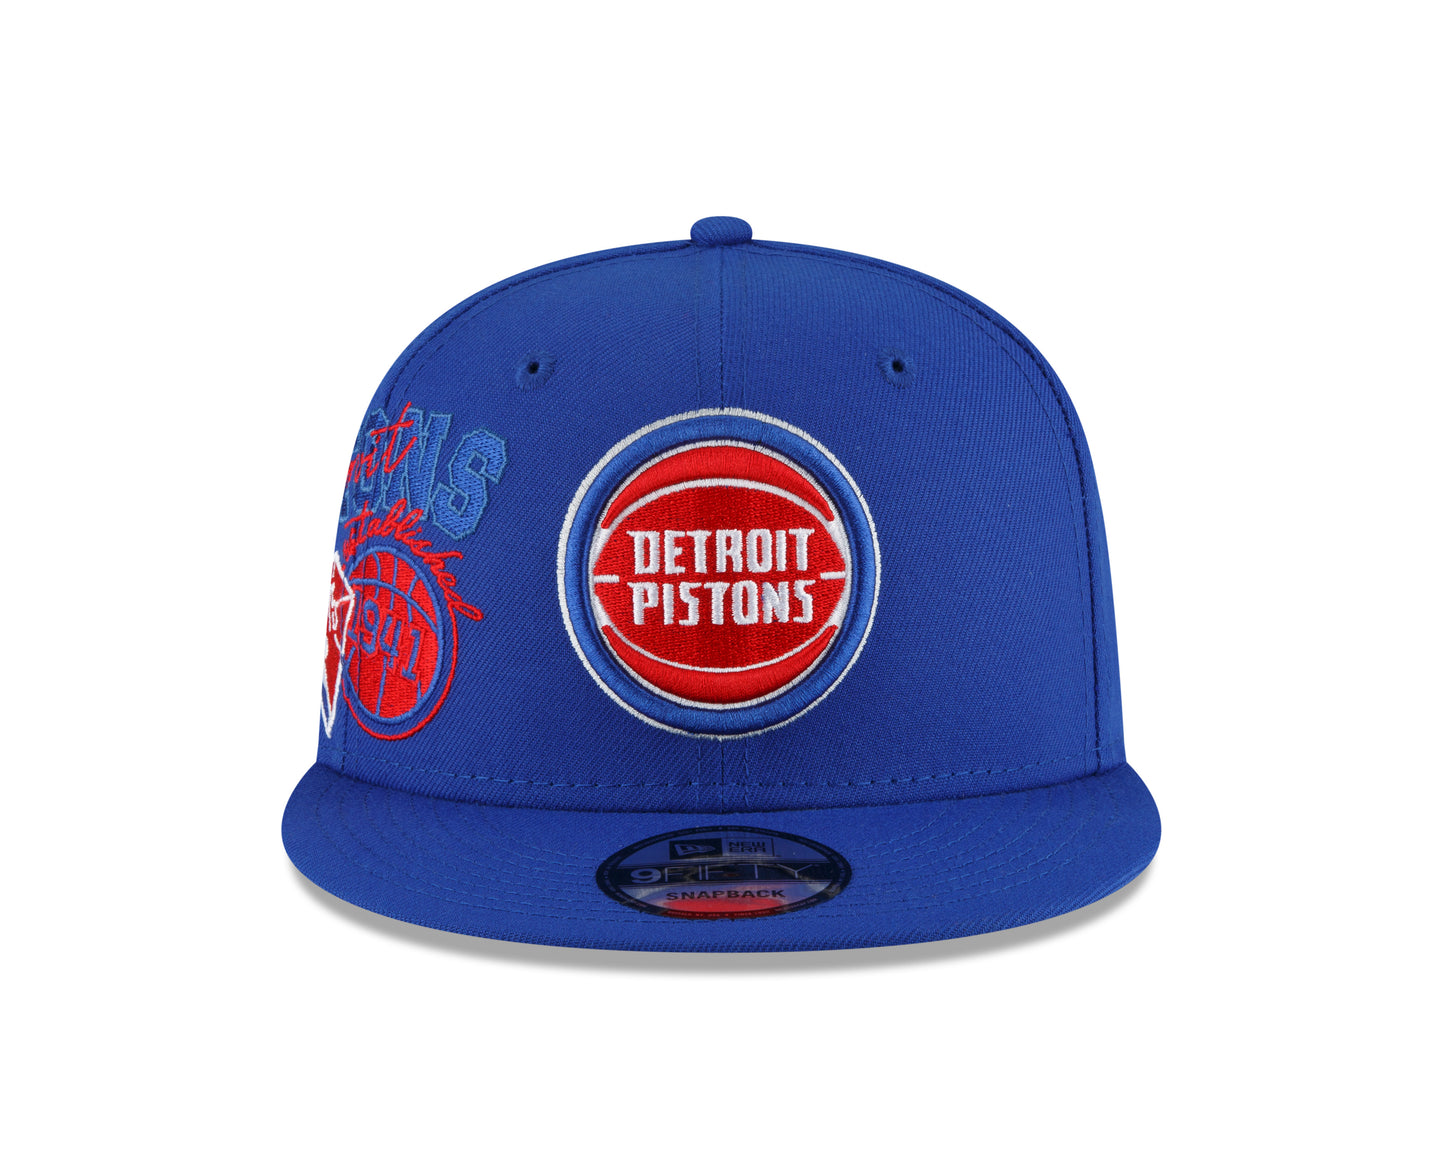 Detroit Pistons Authentic Back Half Series 9FIFTY Snap Back Hat - Blue